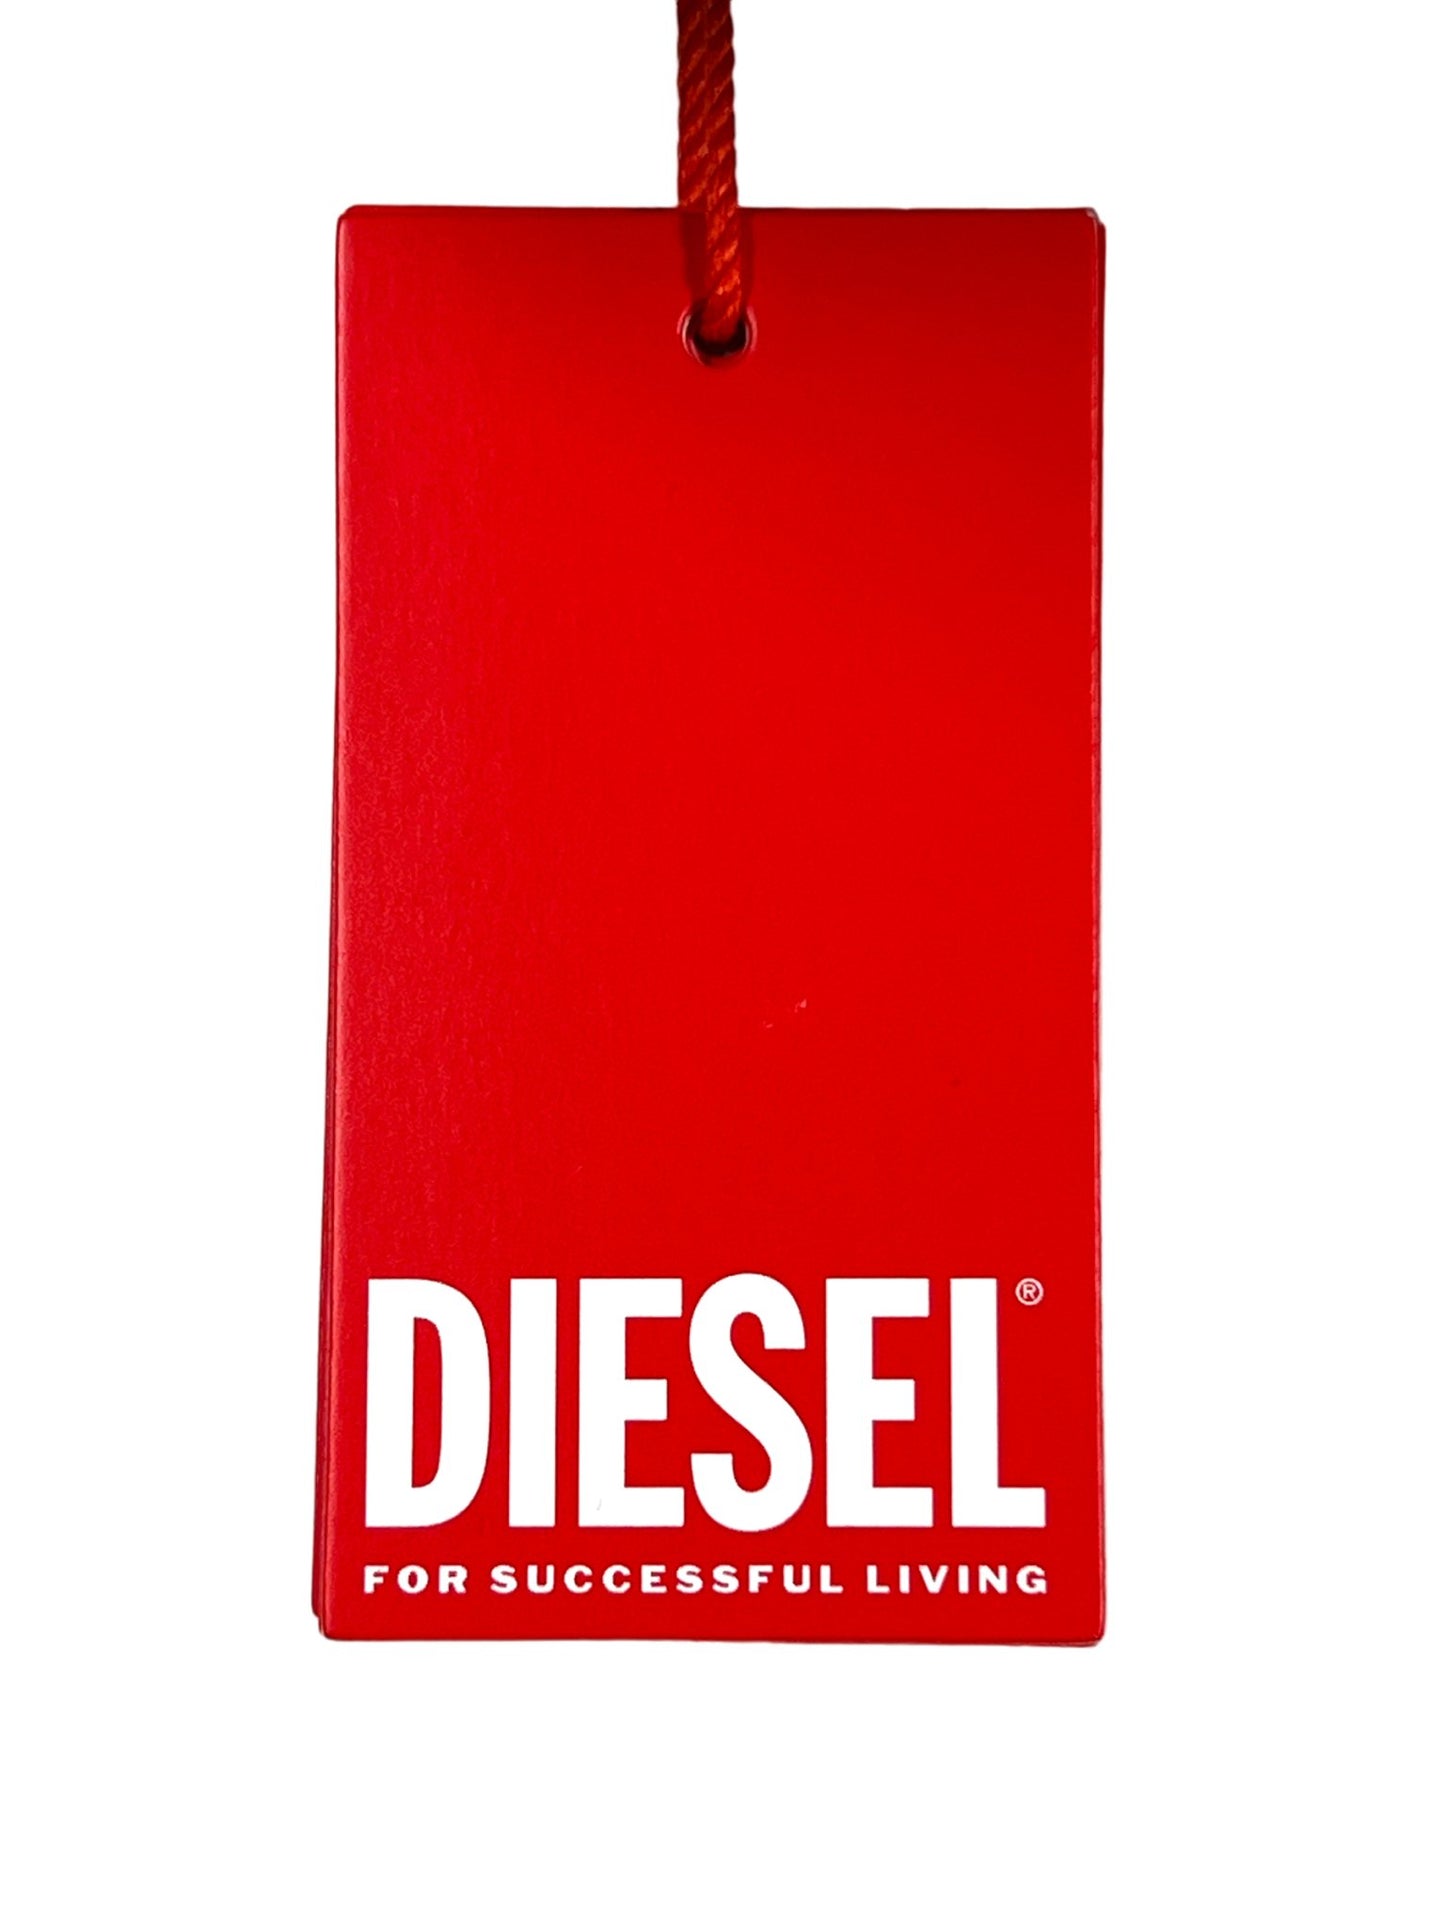 Red DIESEL T-BOXT-N11 men's relaxed-fit T-shirt tag against a black background.